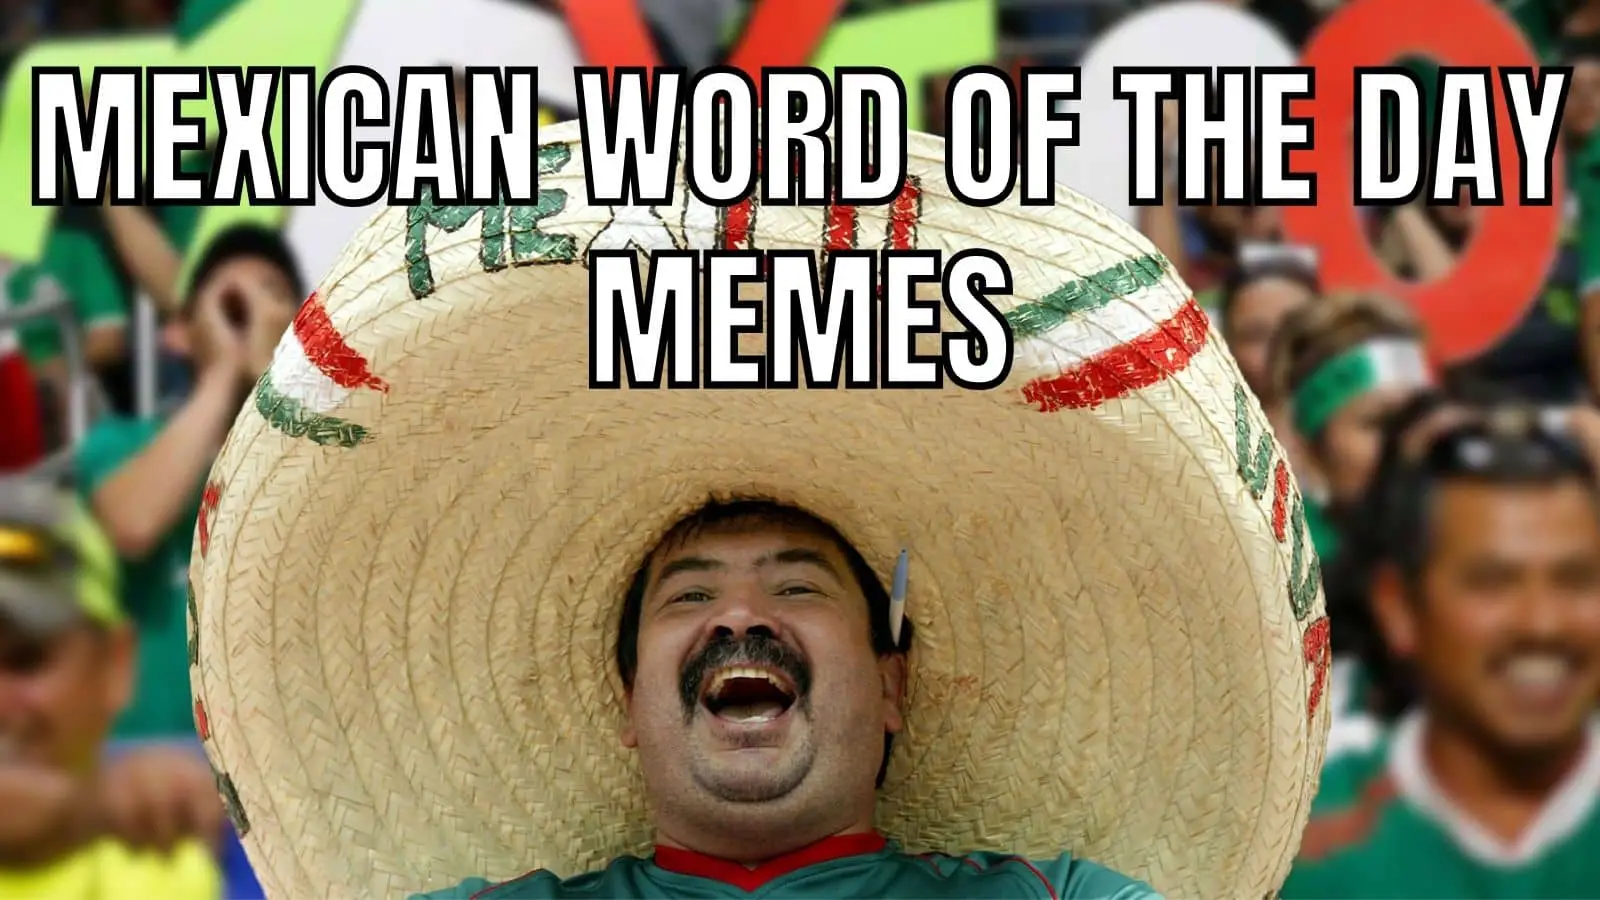 Mexican Word Of The Day Memes on Juan Sombrero